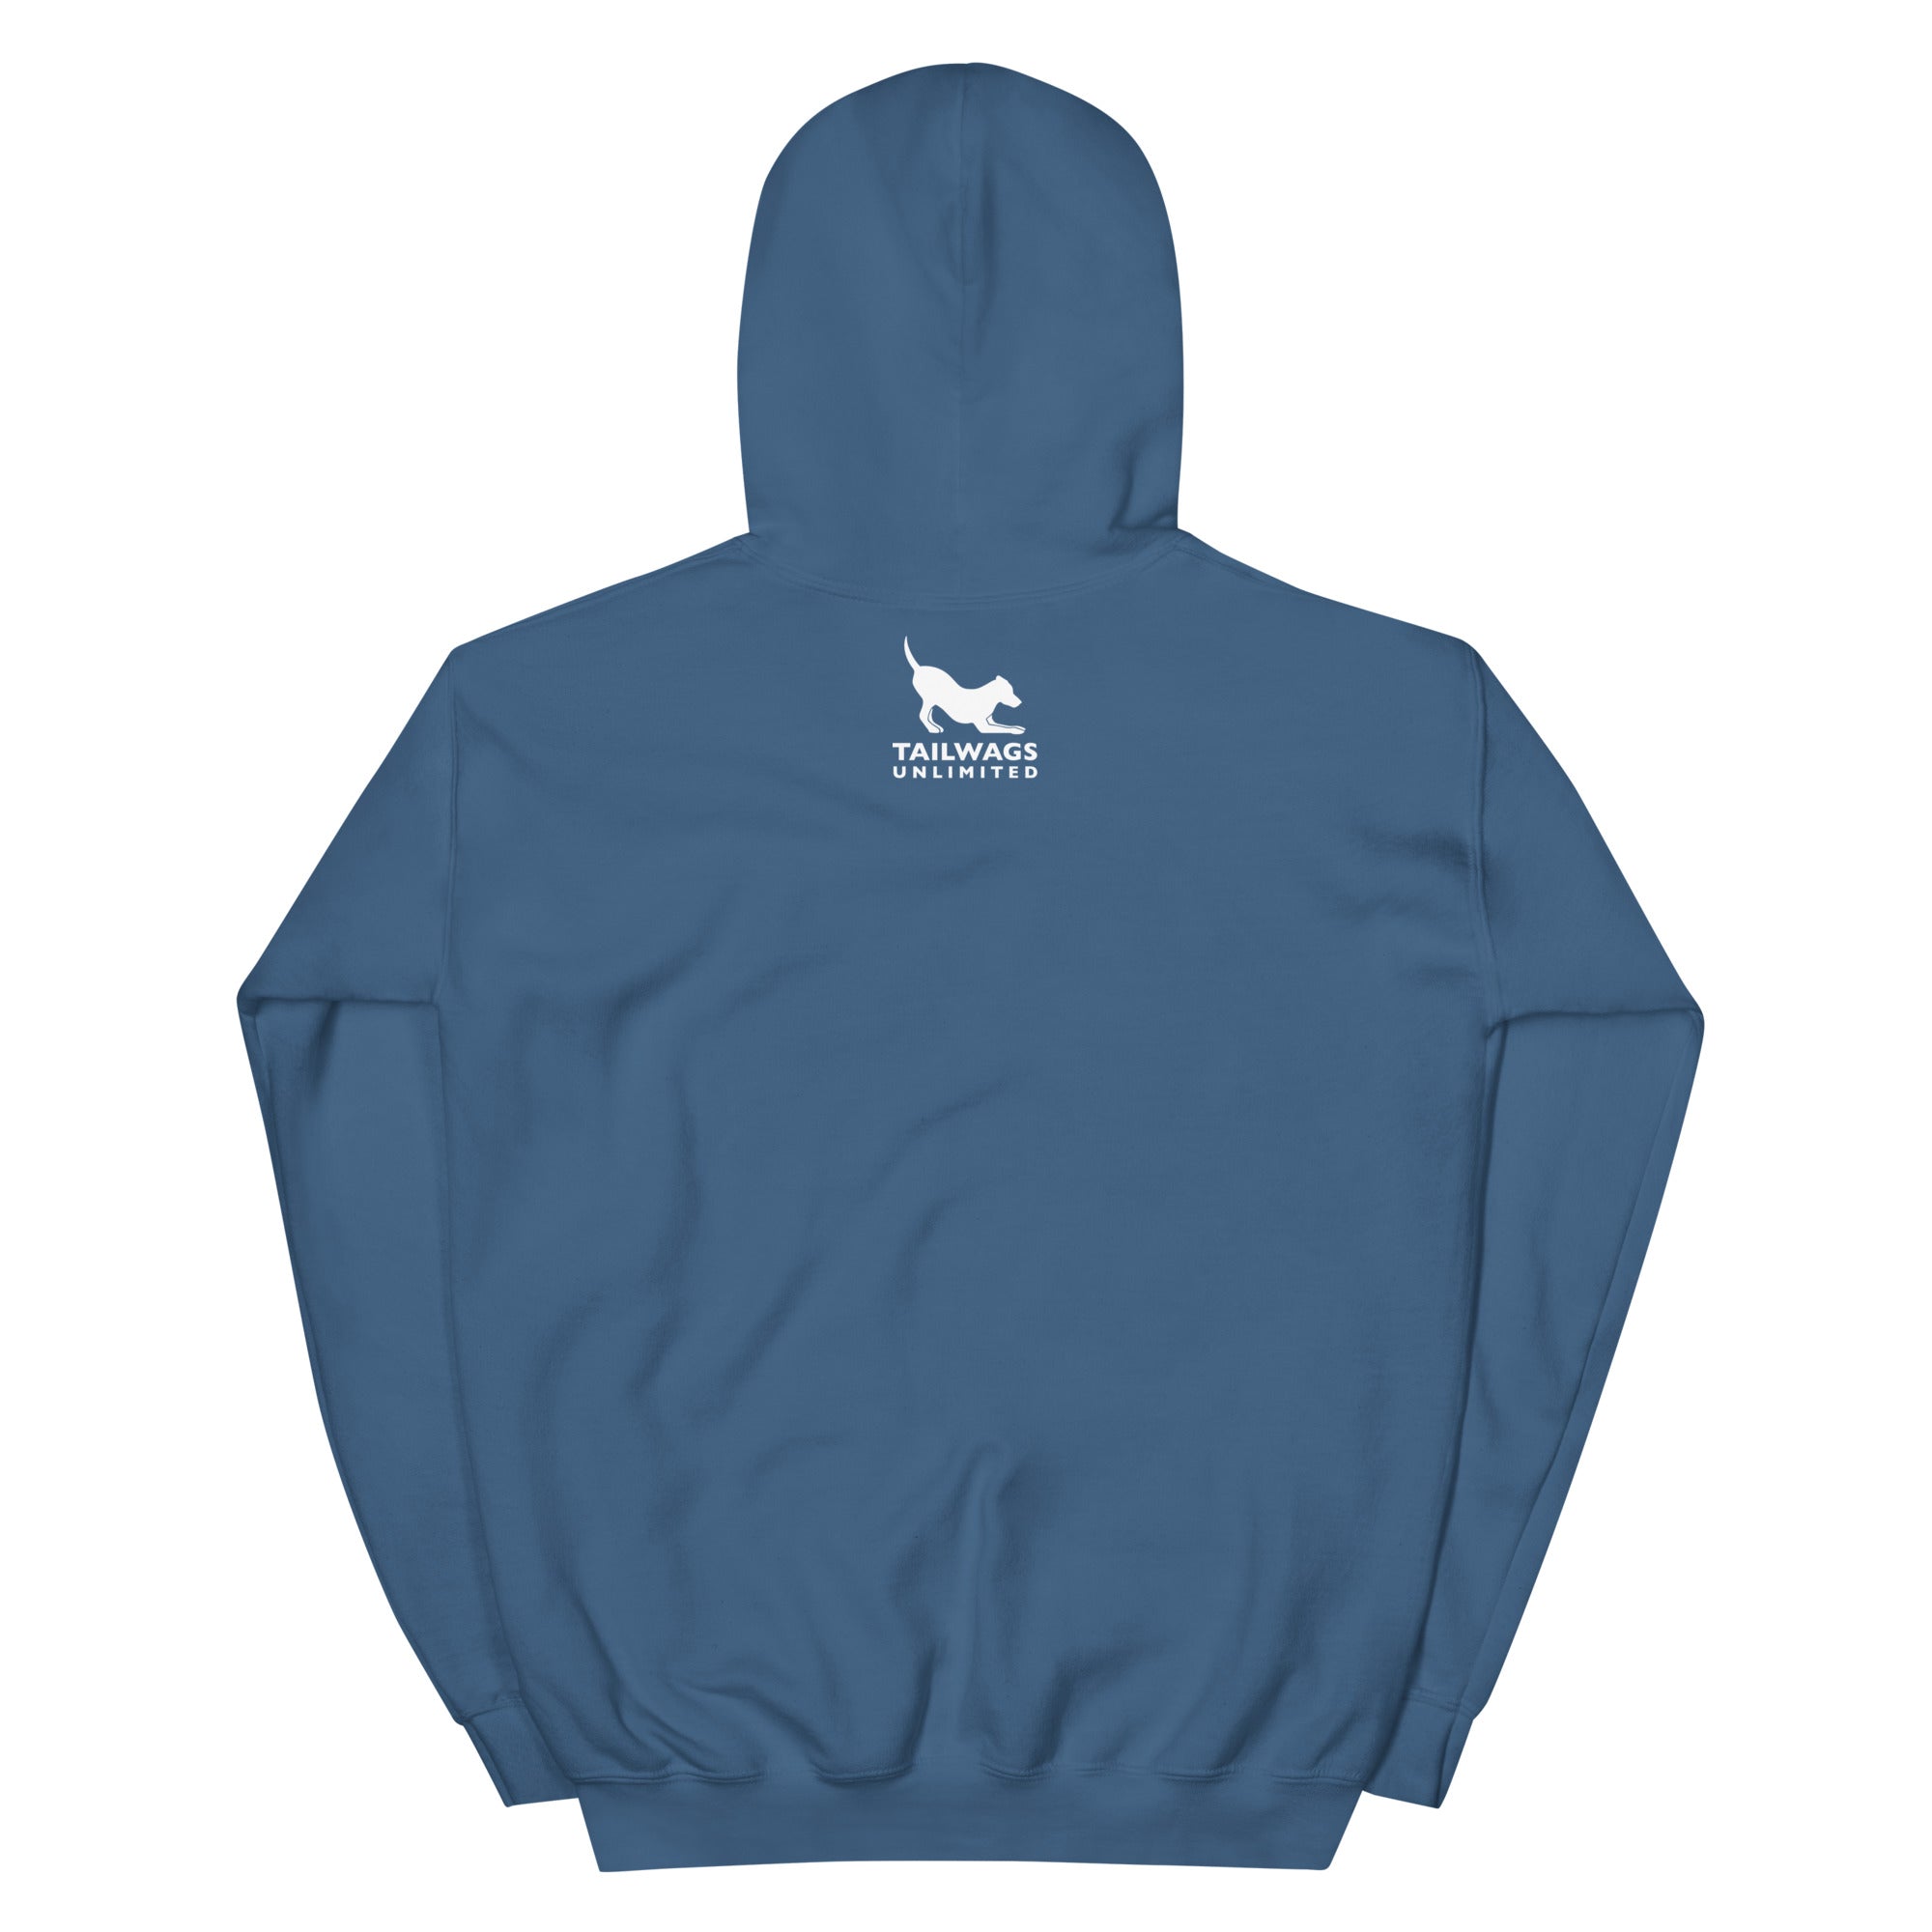 Cupup Hoodie - TAILWAGS UNLIMITED